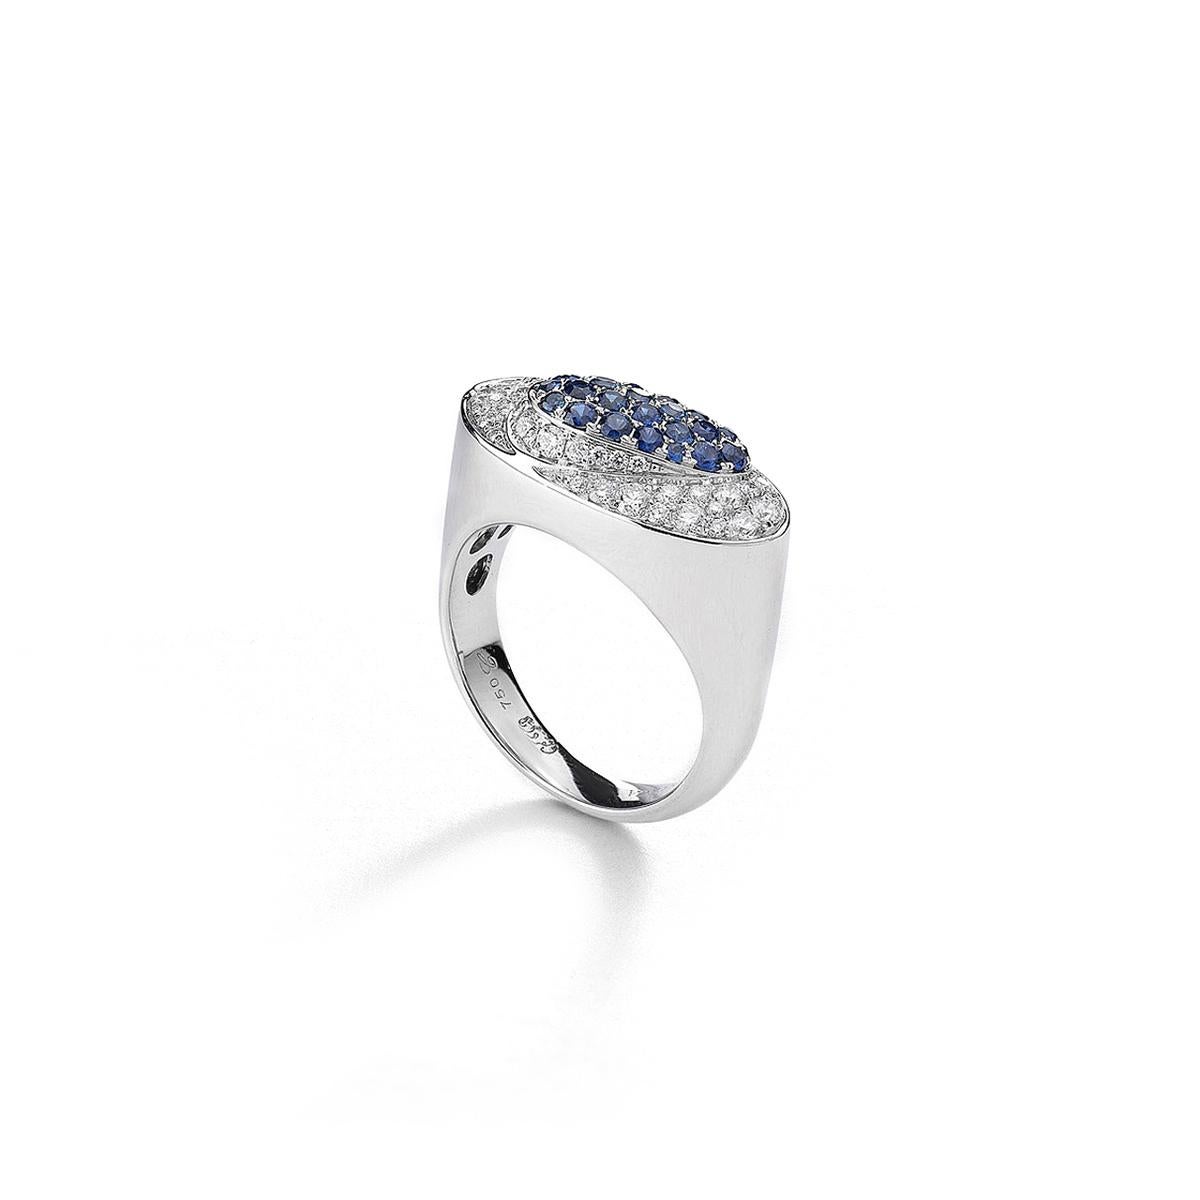 Ring in 18kt white gold set with 29 blue sapphires 0.70 cts and 41 diamonds 0.53 cts Size 53  Ring in 18kt white gold set with 29 blue sapphires 0.71 cts and 41 diamonds 0.60 cts Size 55